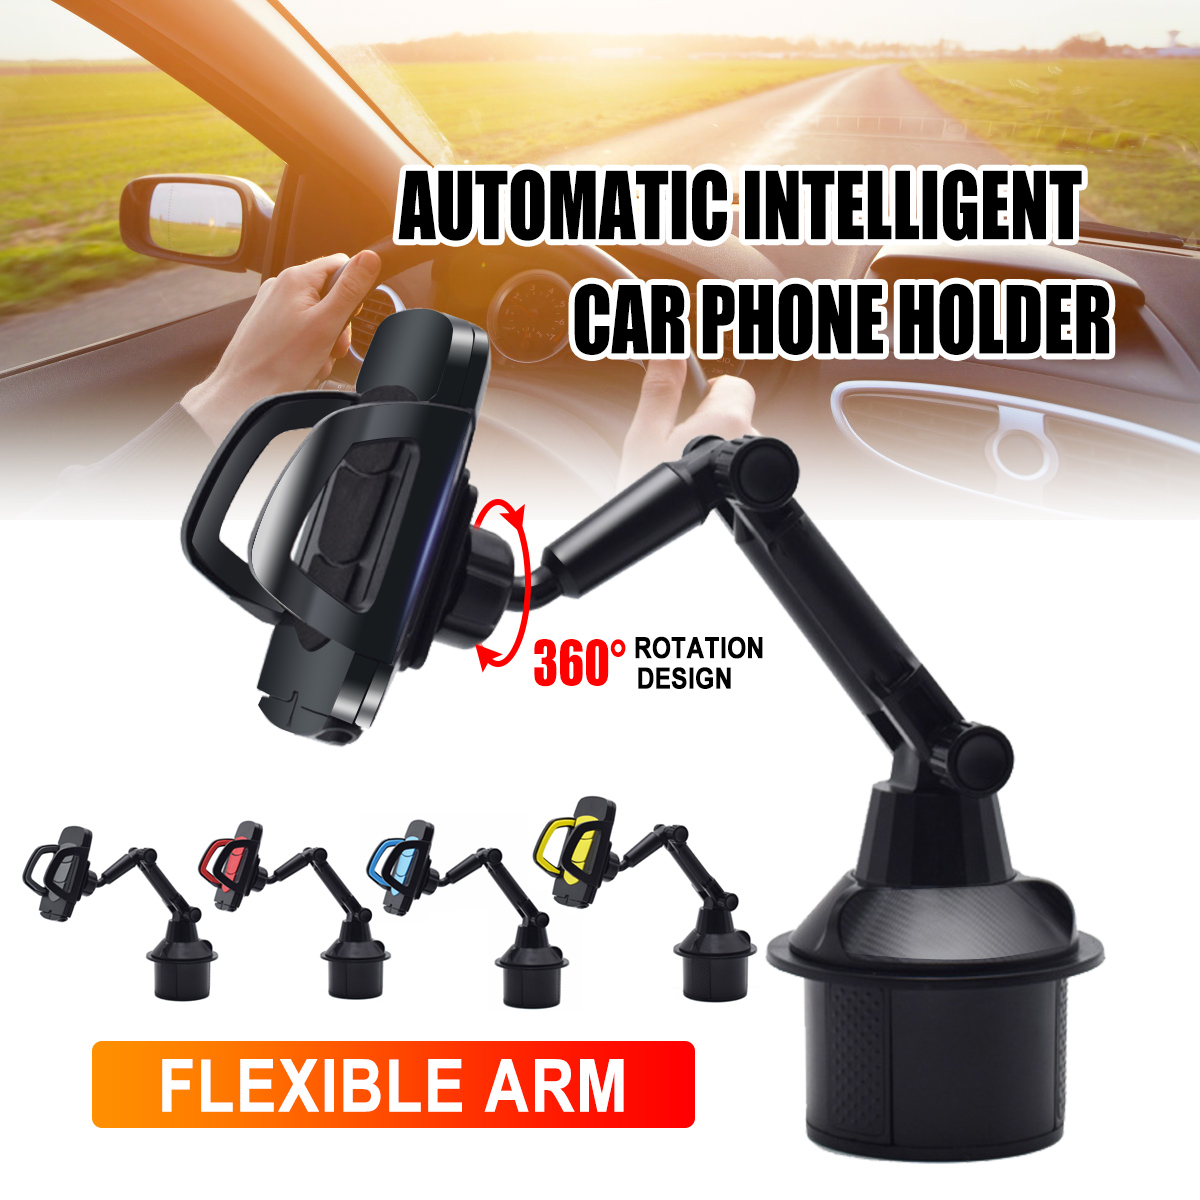 Universal-360-Rotation-Flexible-Arm-Car-Phone-Mount-Gooseneck-Cup-Holder-for-5-95cm-Width-Cell-Phone-1718228-1